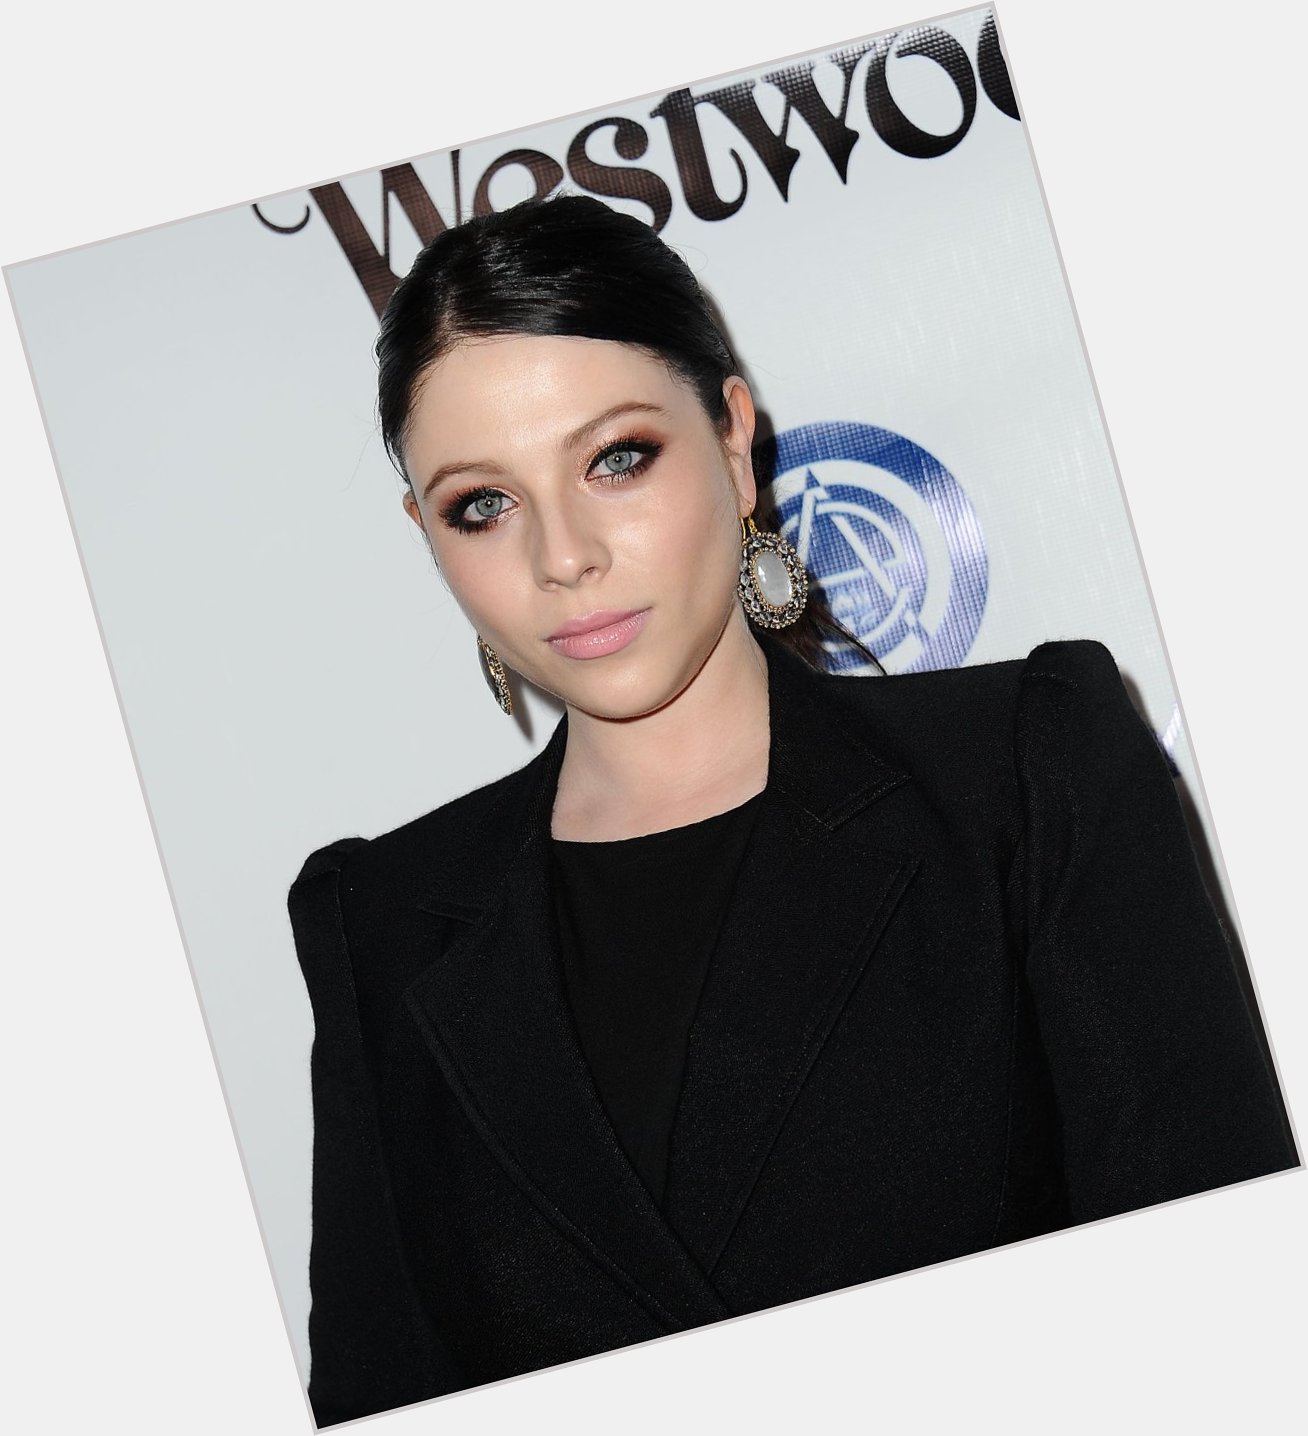 Happy Birthday to Michelle Trachtenberg who turns 35 today! 